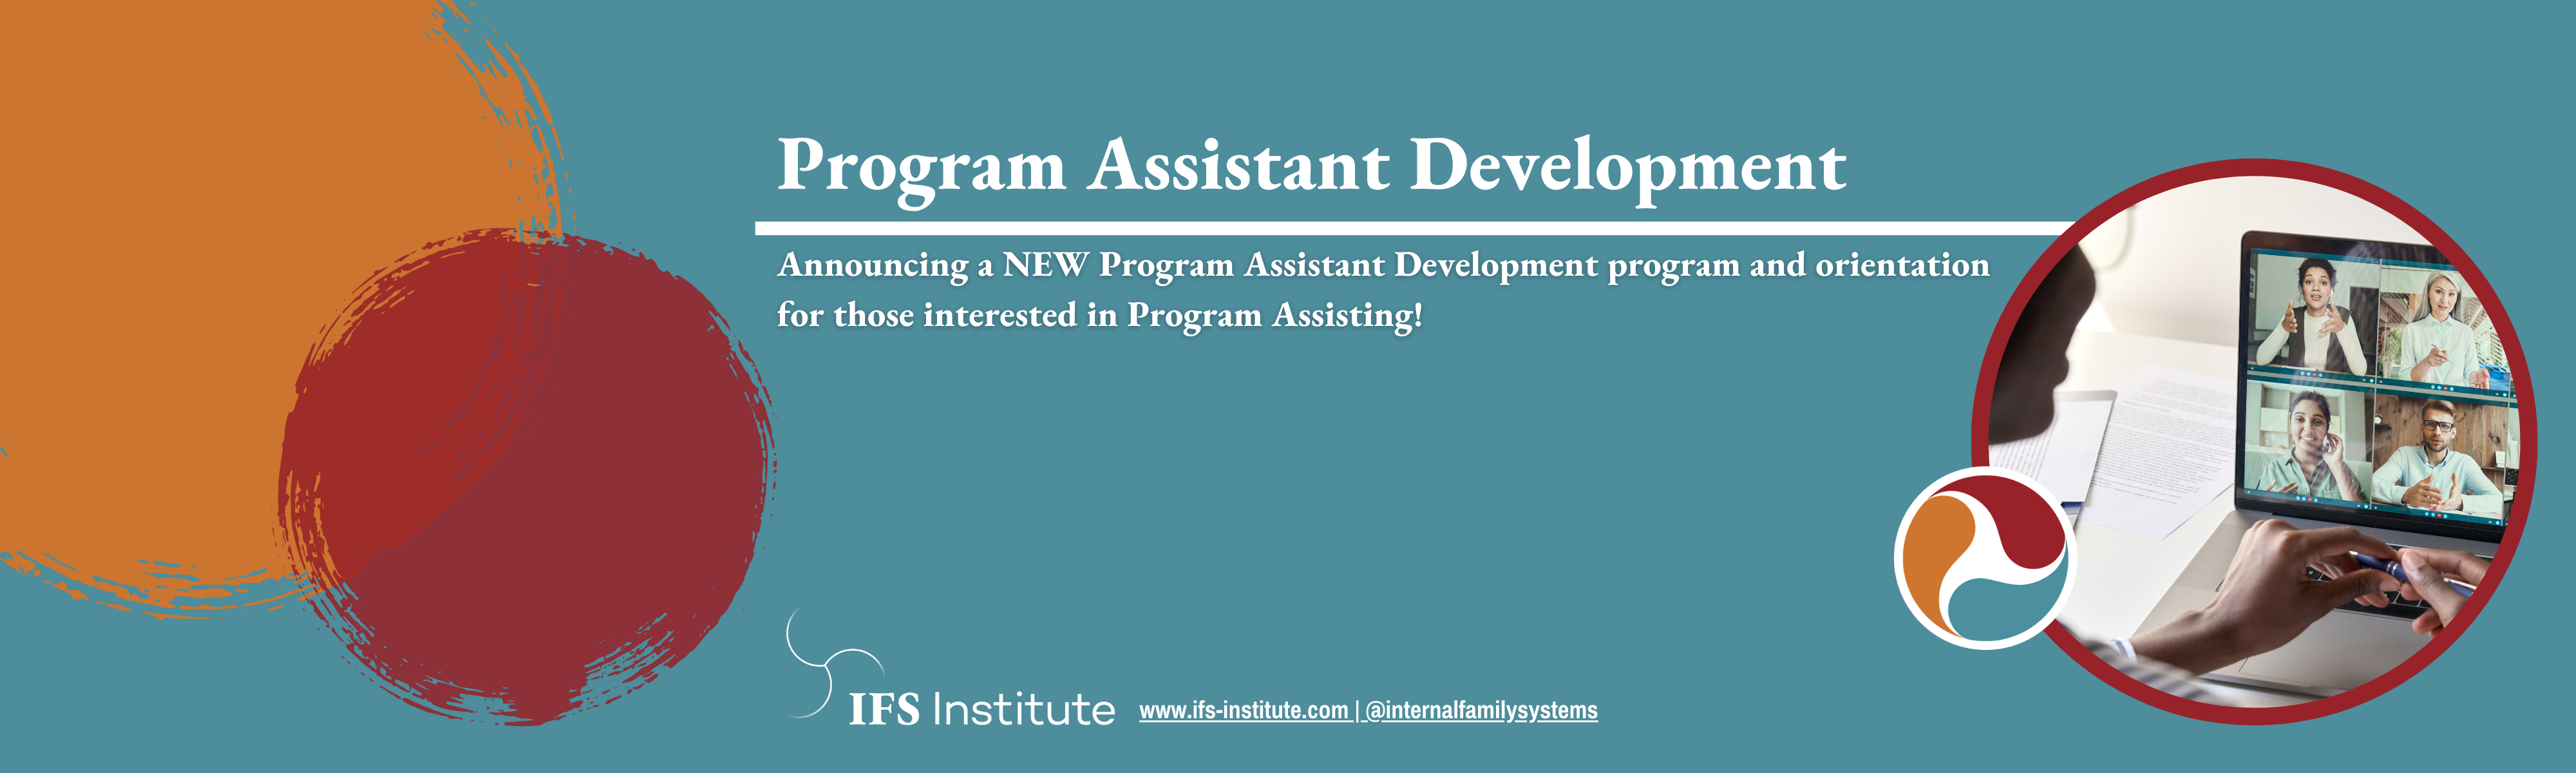 Blue box with circles and text says Program Assistant Development - Announcing a NEW Program Assistant Development program and orientation for those interested in Program Assisting!